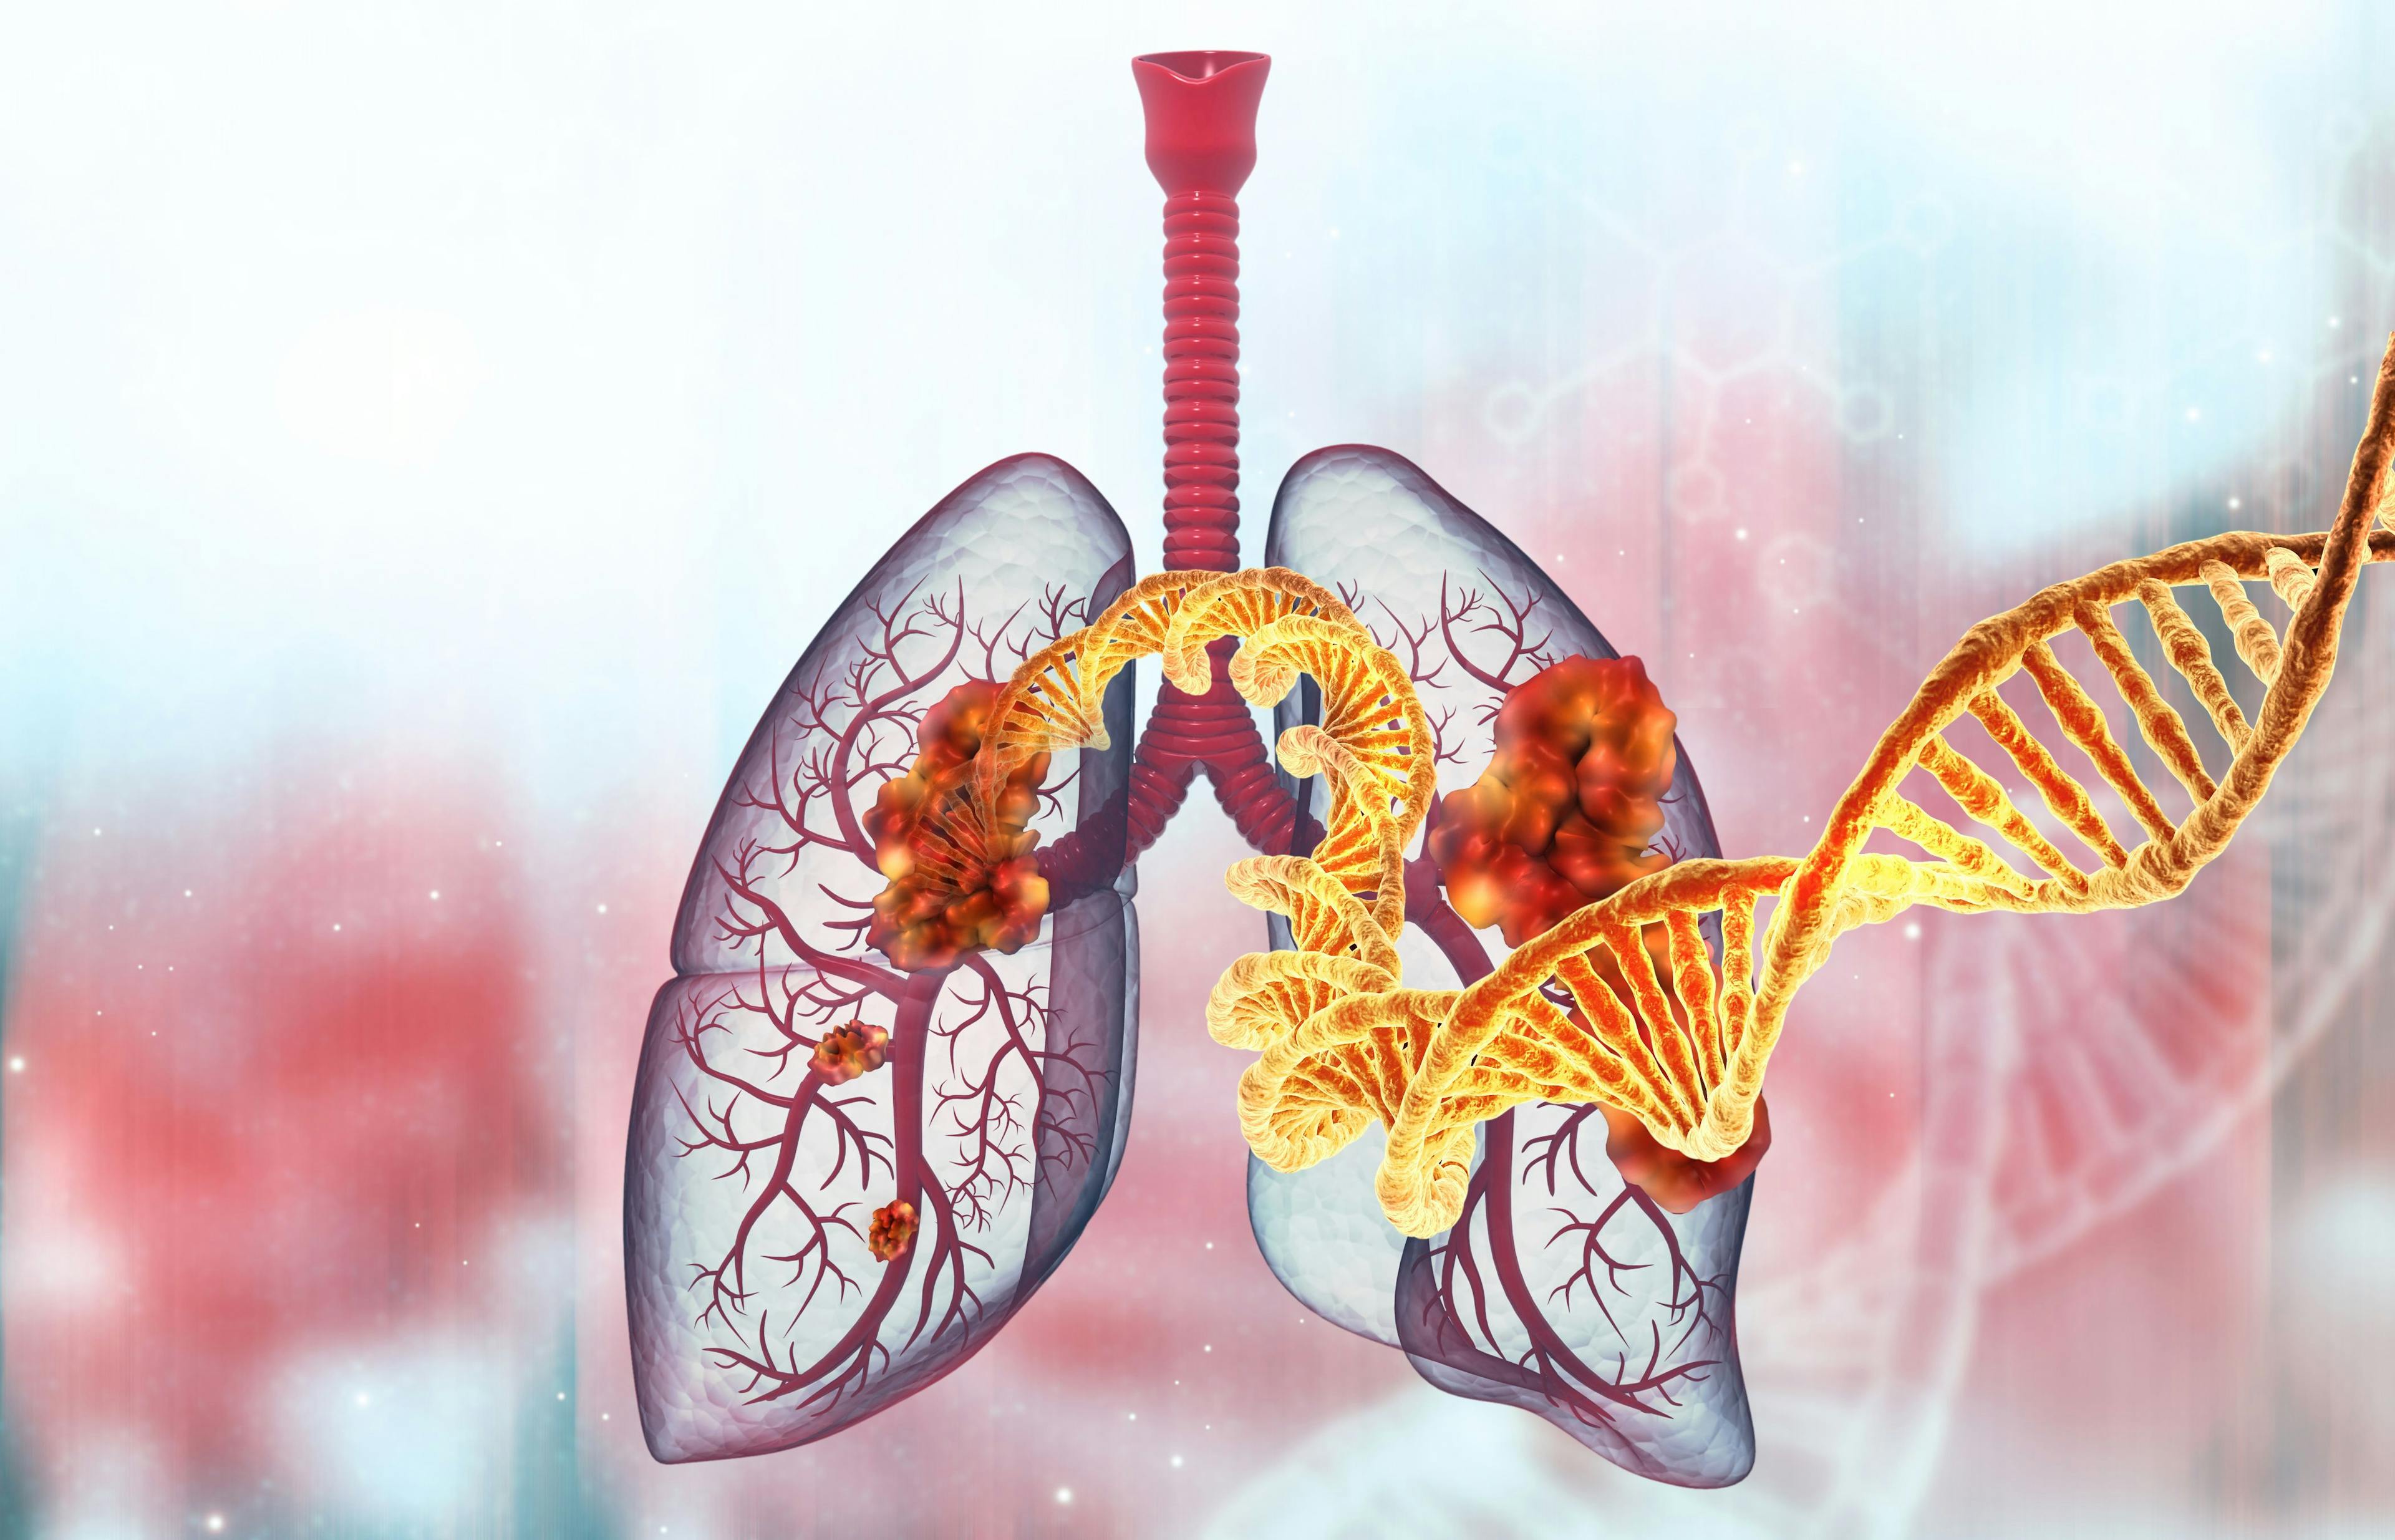 Human lung cancer with dna strand. 3d illustration | Image Credit: © Rasi - www.stock.adobe.com